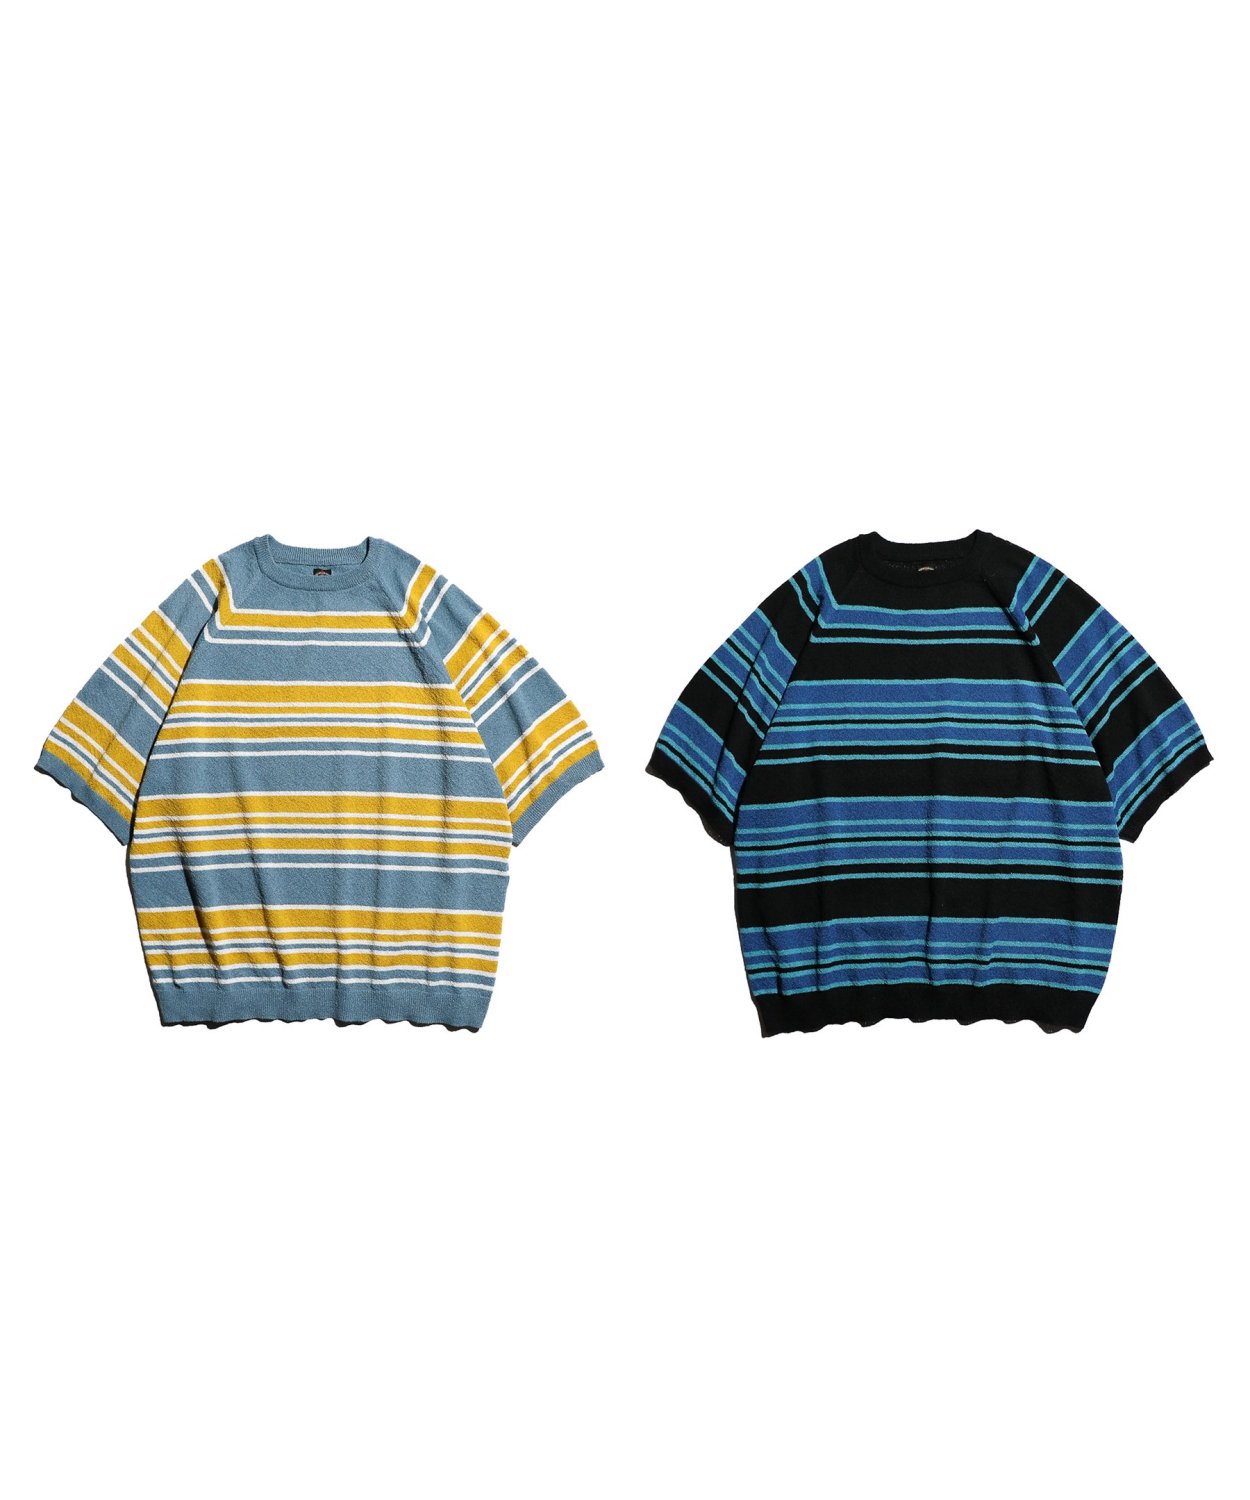 TOWNCRAFT / SURF BORDER SS CREW SWEATER